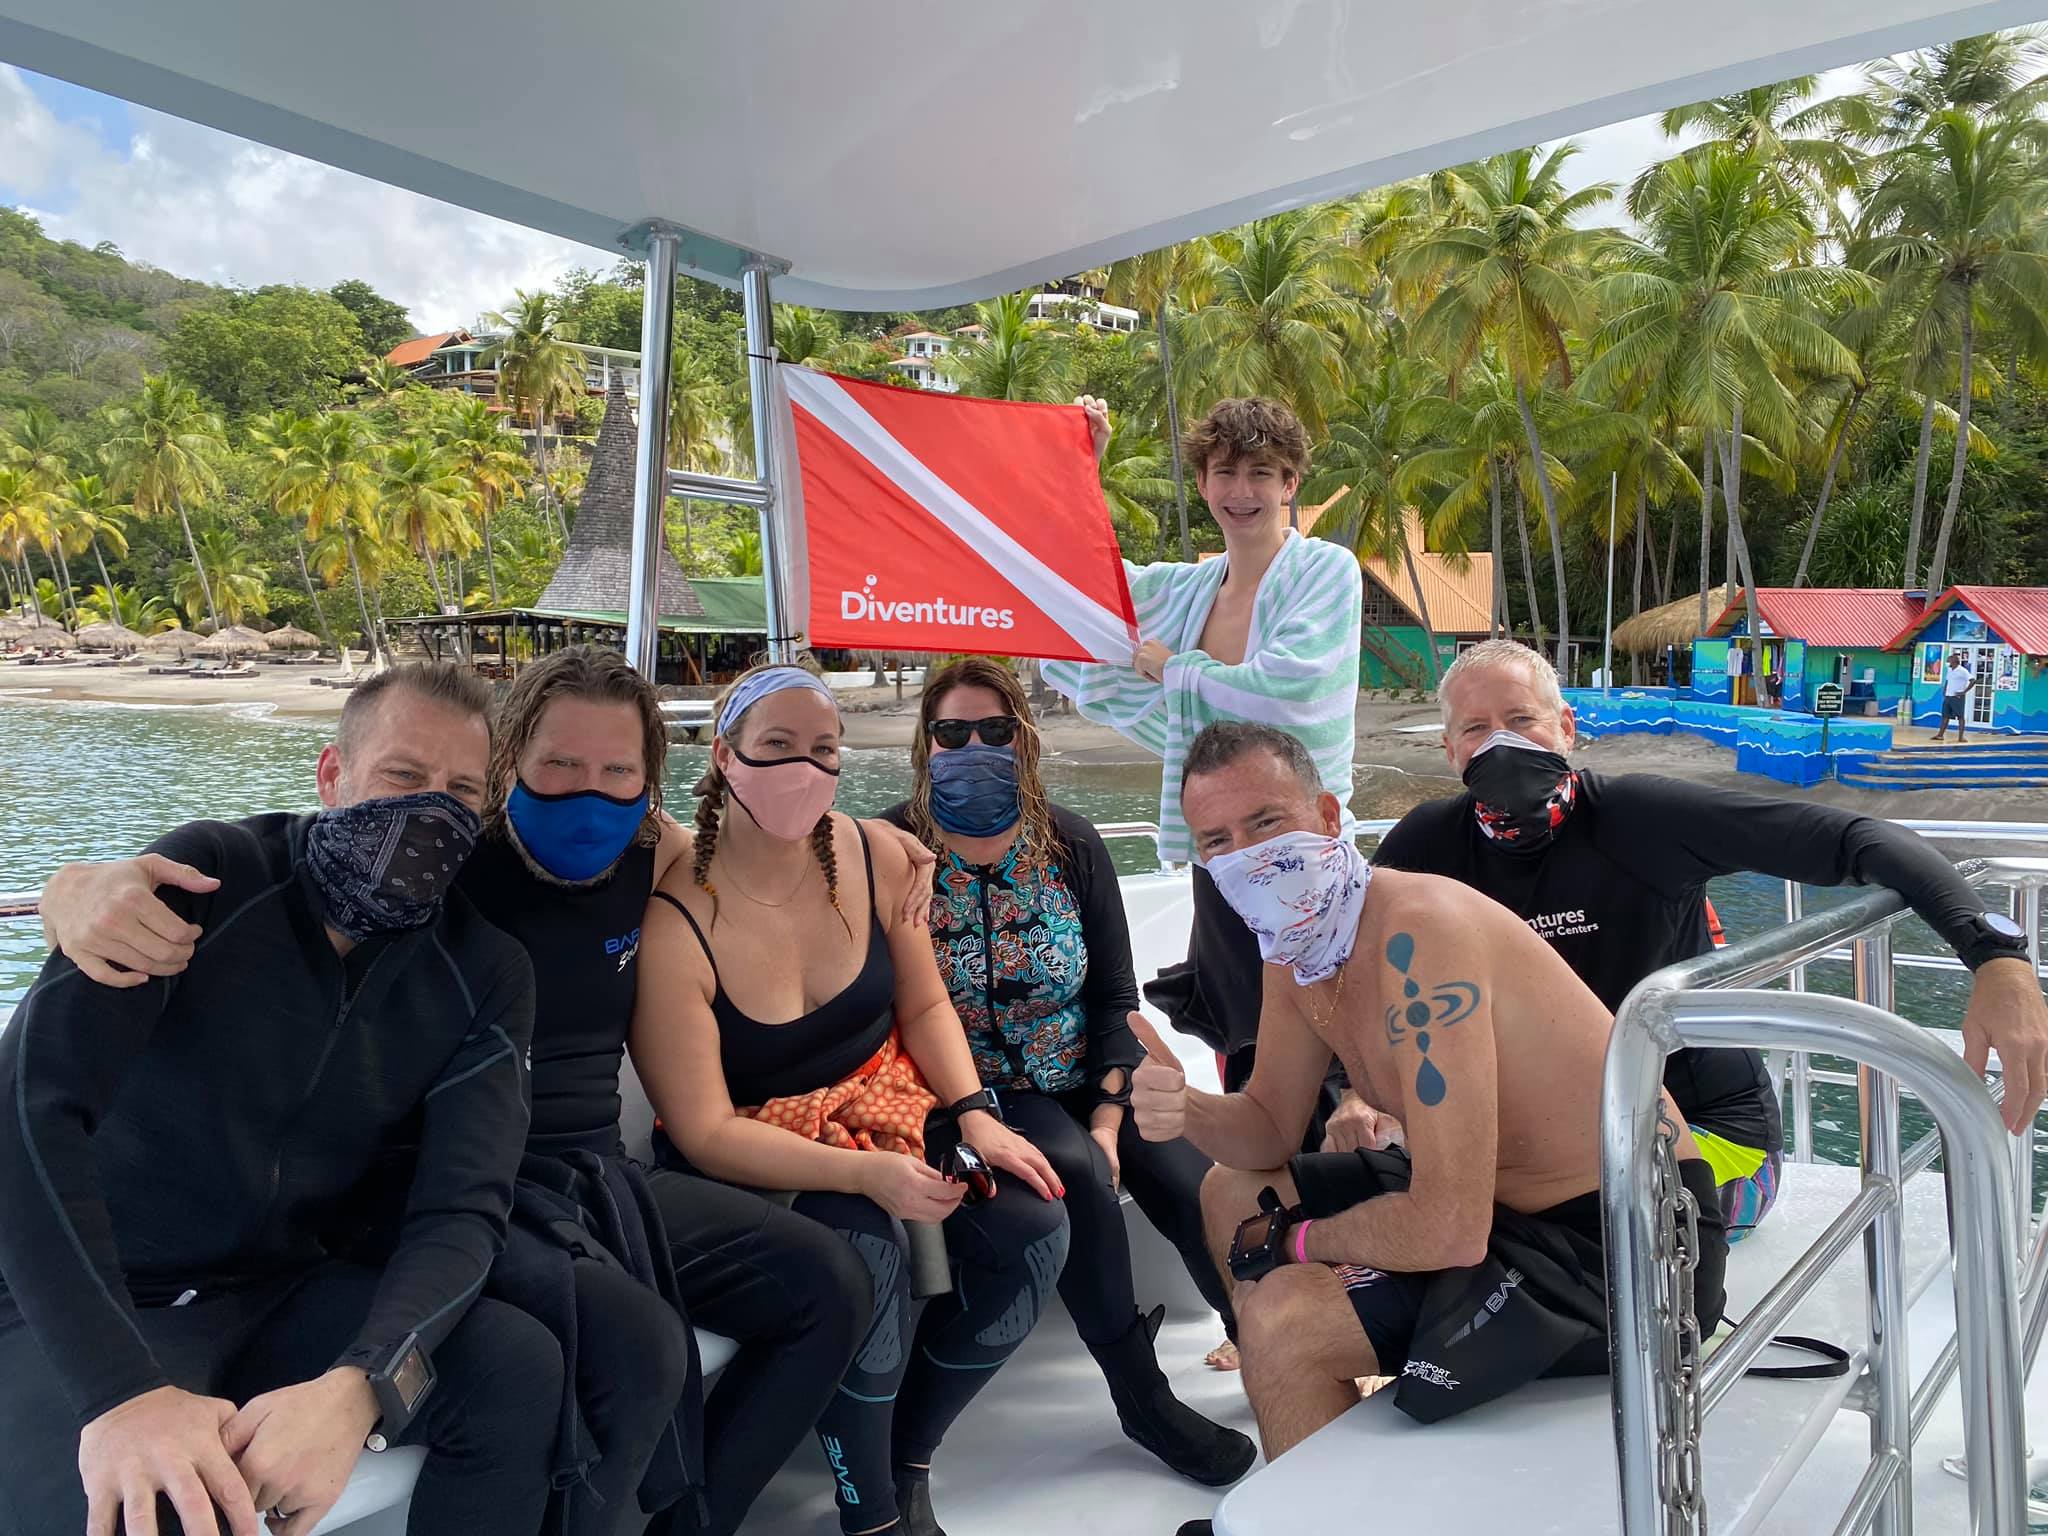 St. Lucia Scuba diving group on boat